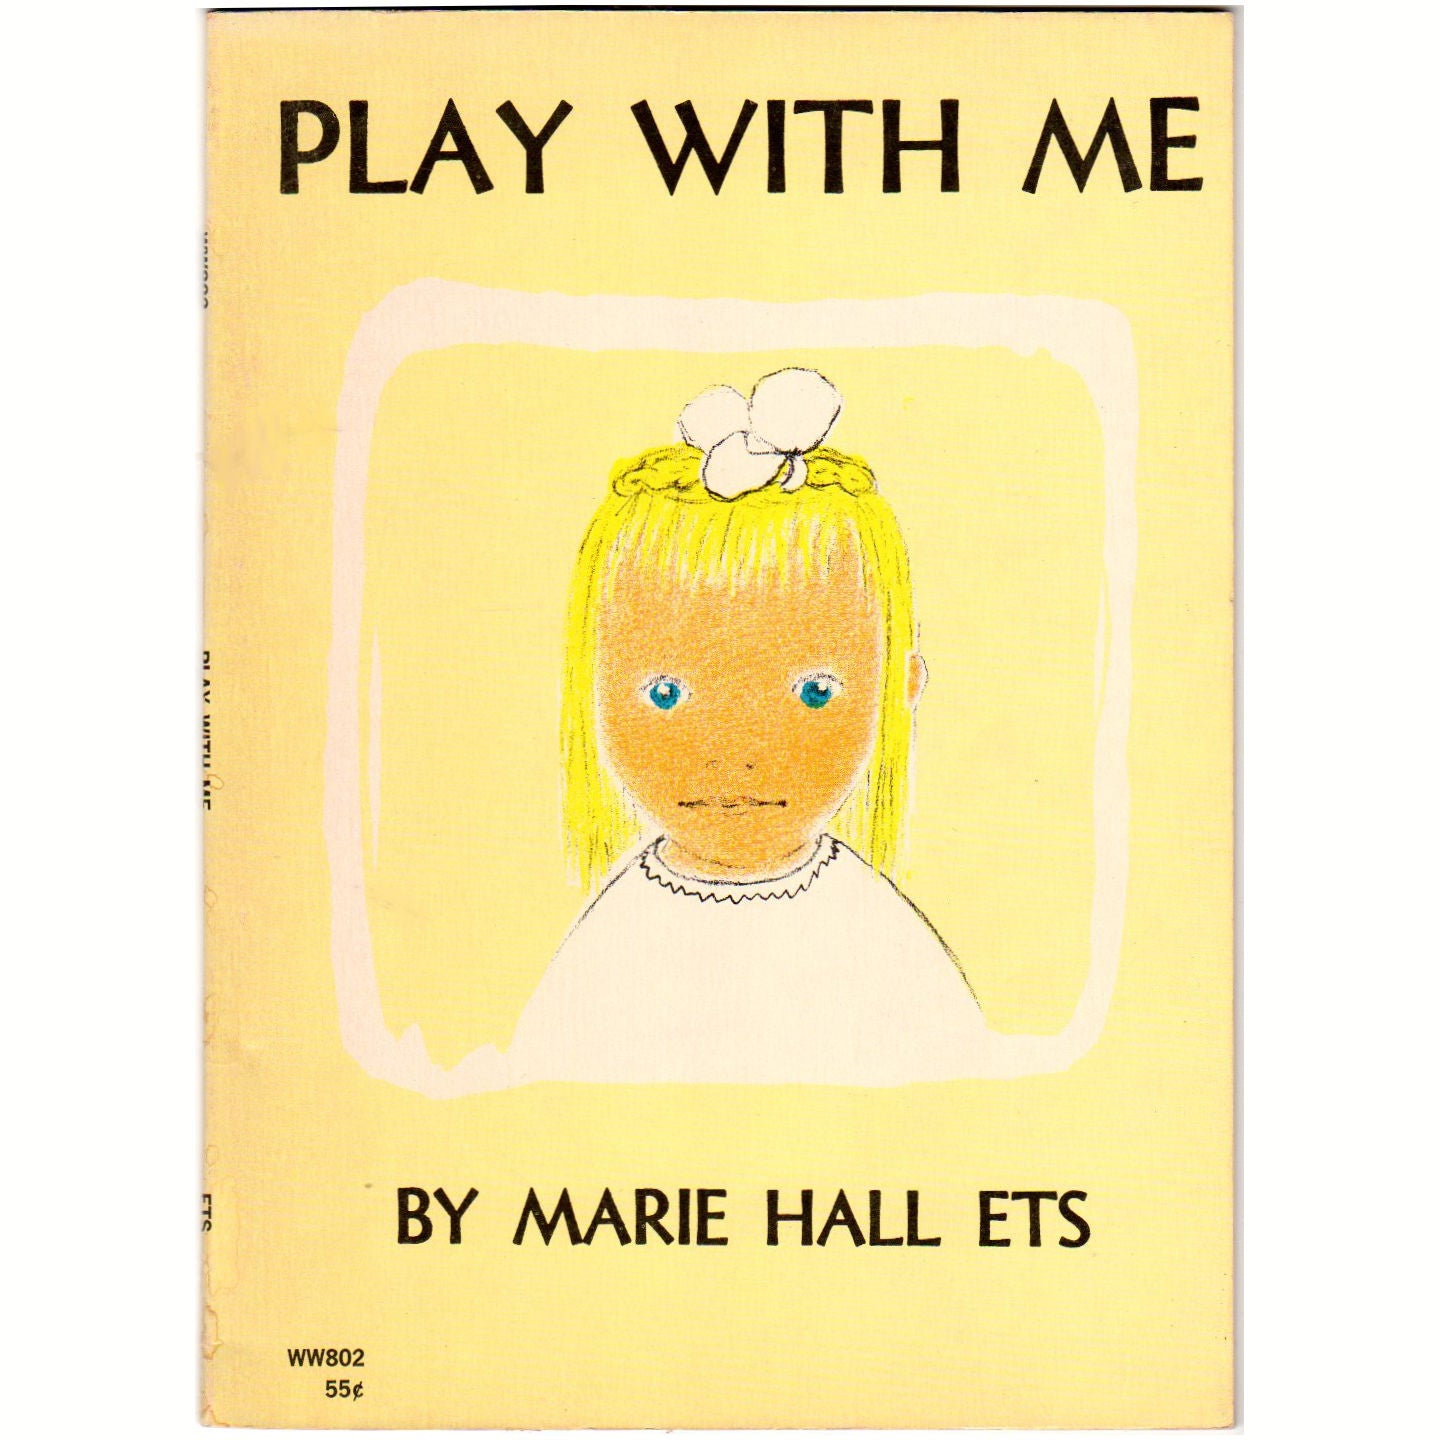 Play with Me by Marie Hall Ets: 9780140501780 | :  Books